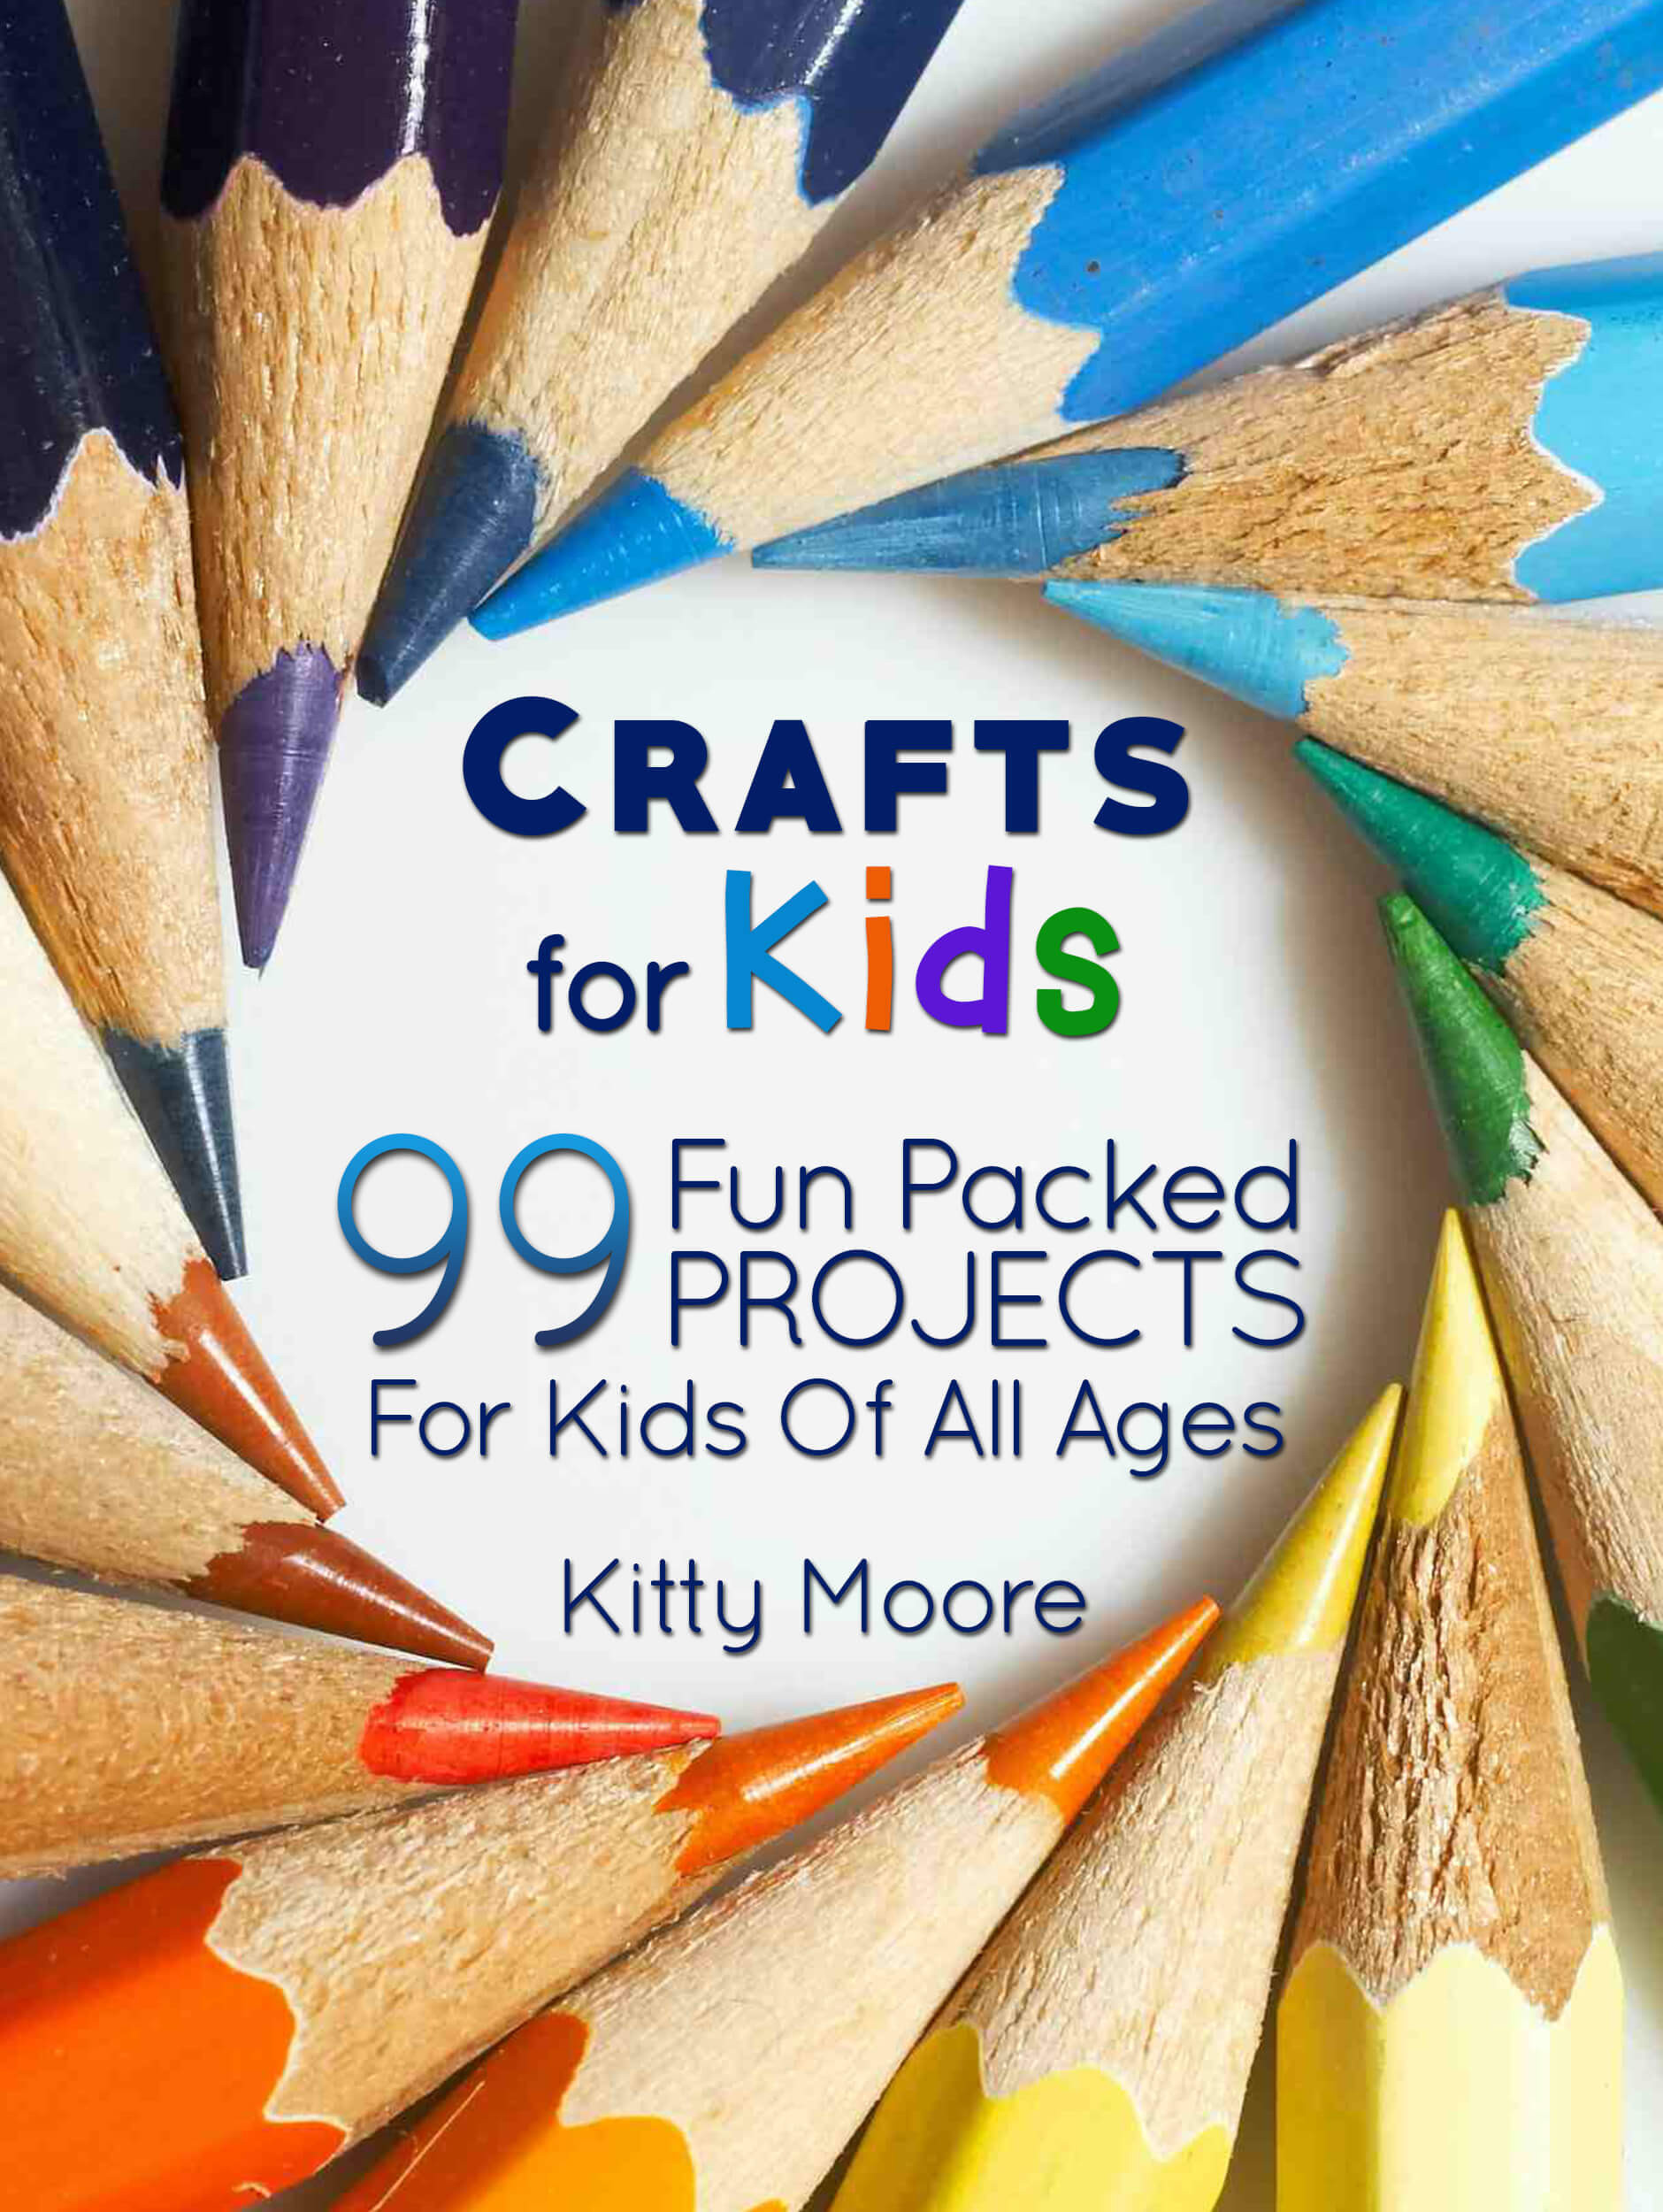 Free Craft Ideas For Kids
 FREE BOOK – Crafts for Kids 99 Fun Packed Projects For